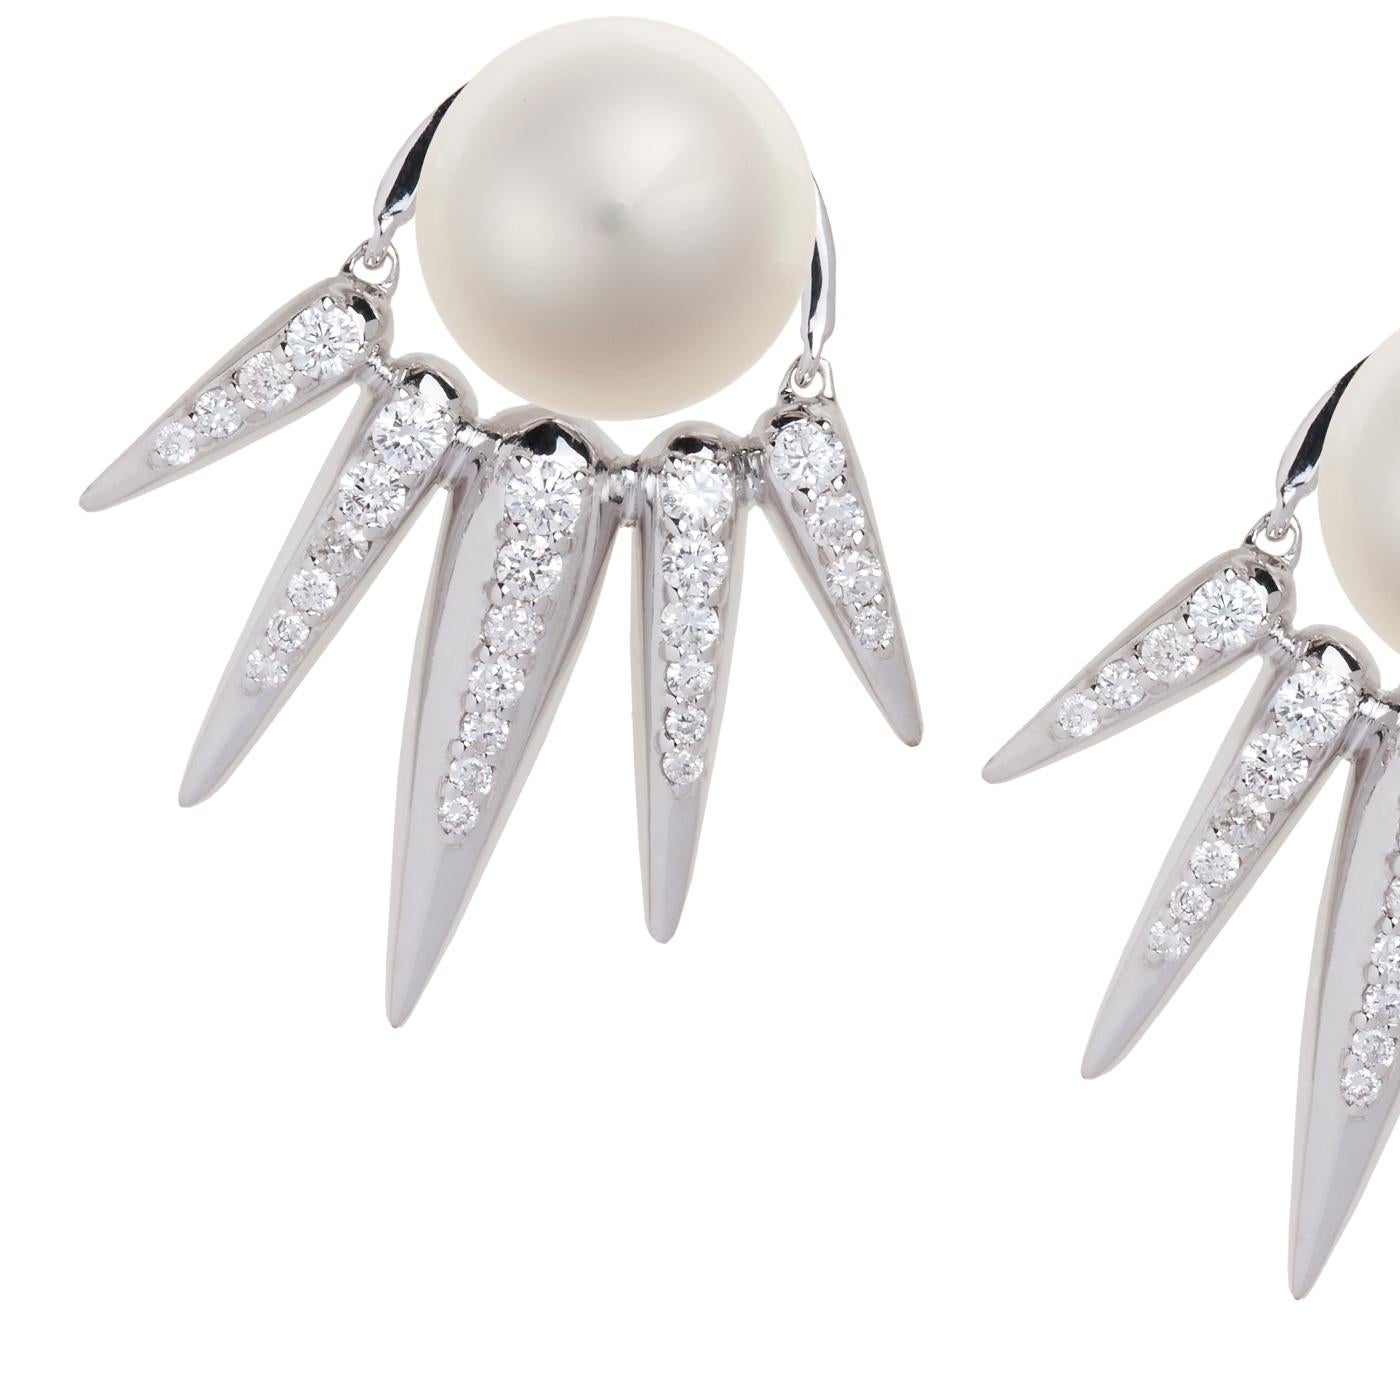 Nikos Koulis 18 Karat White Gold White Diamond and Pearls Jacket Earrings In New Condition For Sale In Athens, Attic